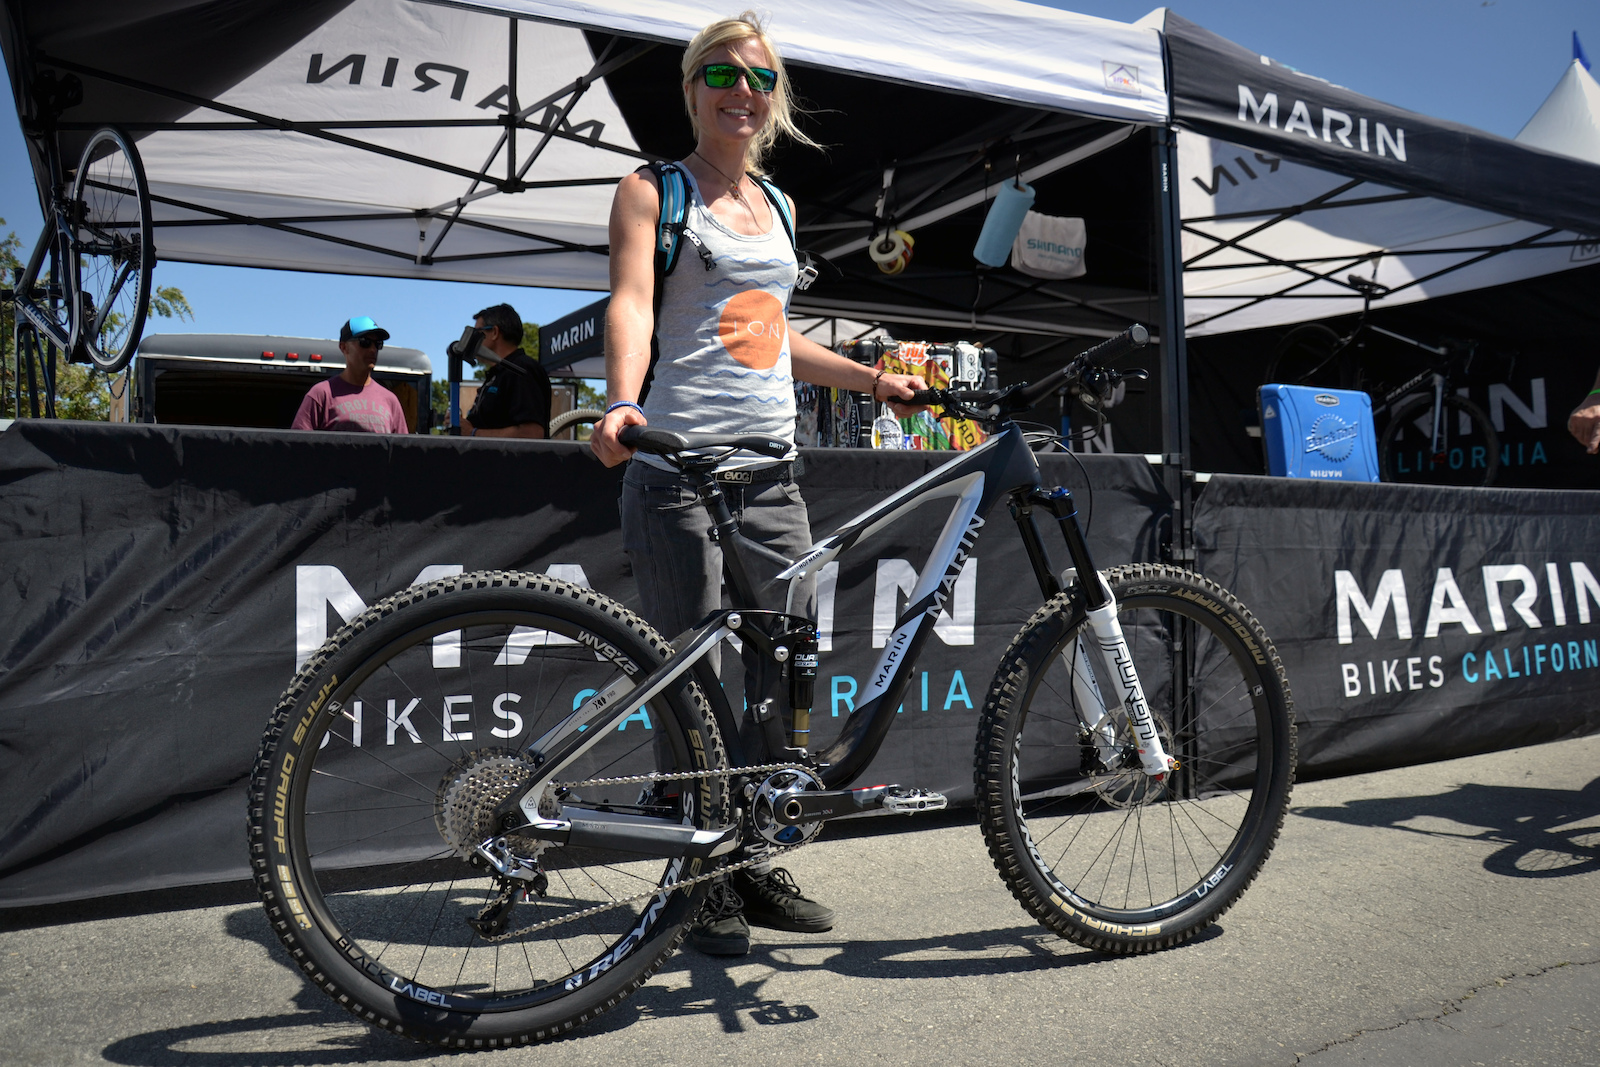 YOu might remember Marin rider Julia Hoffman from her internet famous My Landy edit. Julia came all the way from Germany for her first Sea Otter Classic and to check out the Marin offices. She's not racing this weekend, but she did have her carbon Marin Attack Trail with her which she will be racing the Colorado and Whistler EWS races on later in the year.